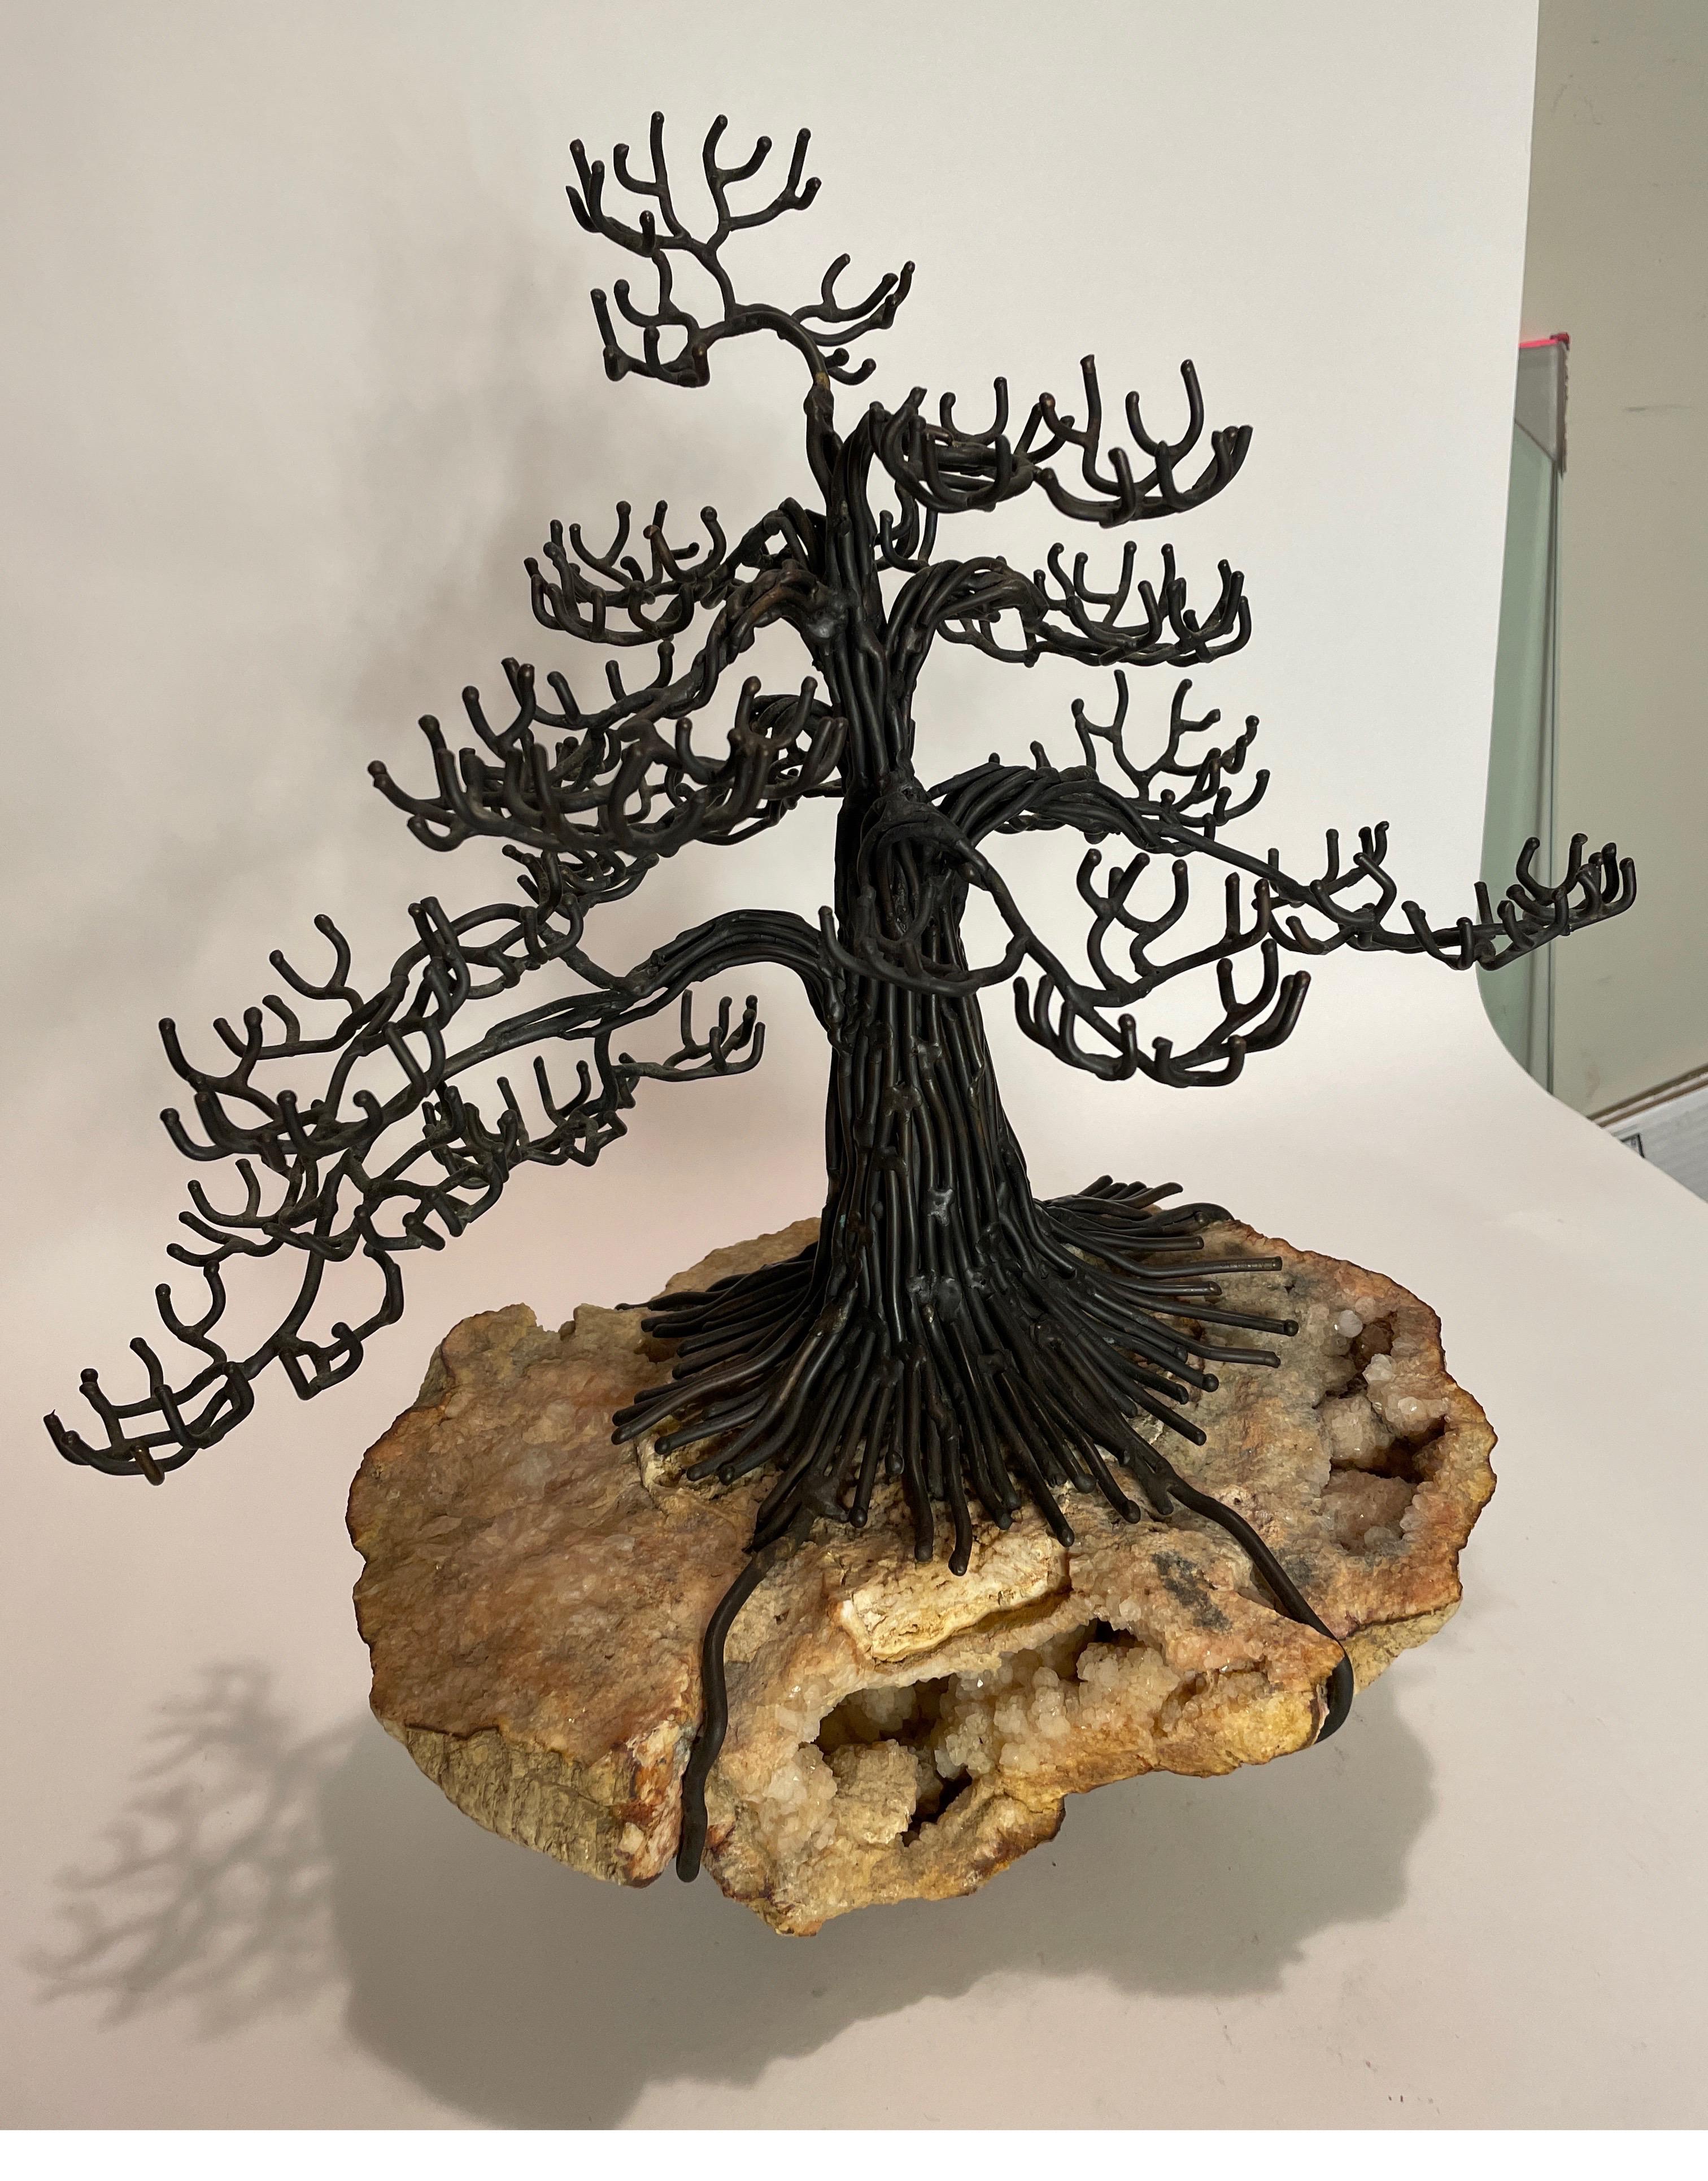 Signed bronze bonsai tree sculpture on a large geode by Bella Ball.